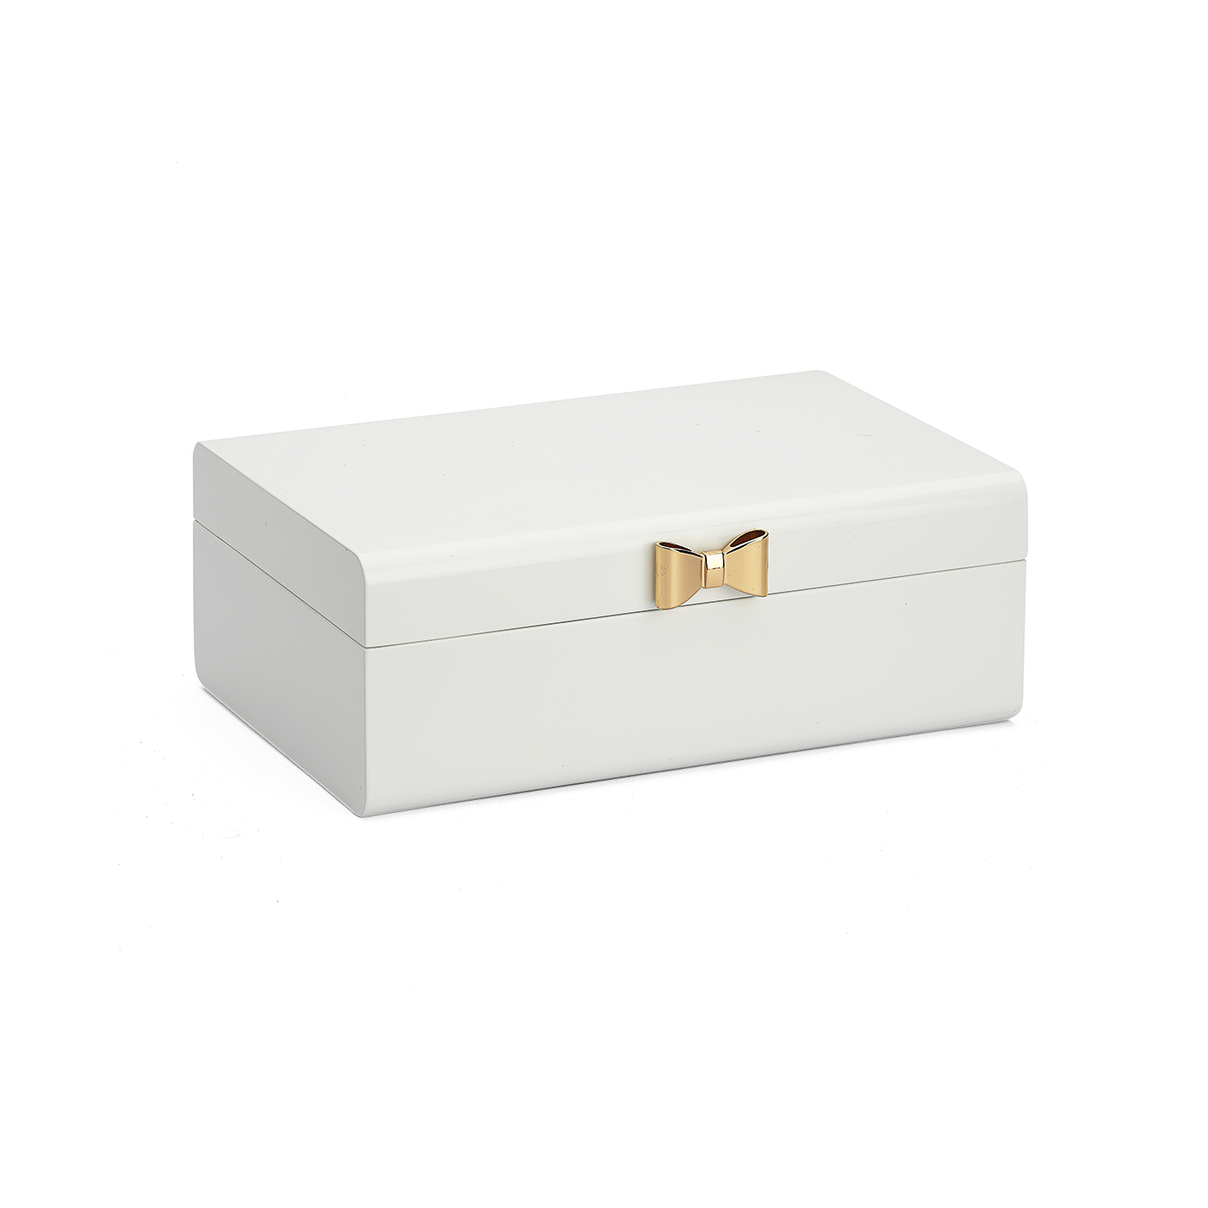 Harlow White Jewellery Box With Gold Tone Bow 6819220 133188 ?width=1208&height=1208&fit=bounds&bg Color=0FFF&canvas=1208%2C1208